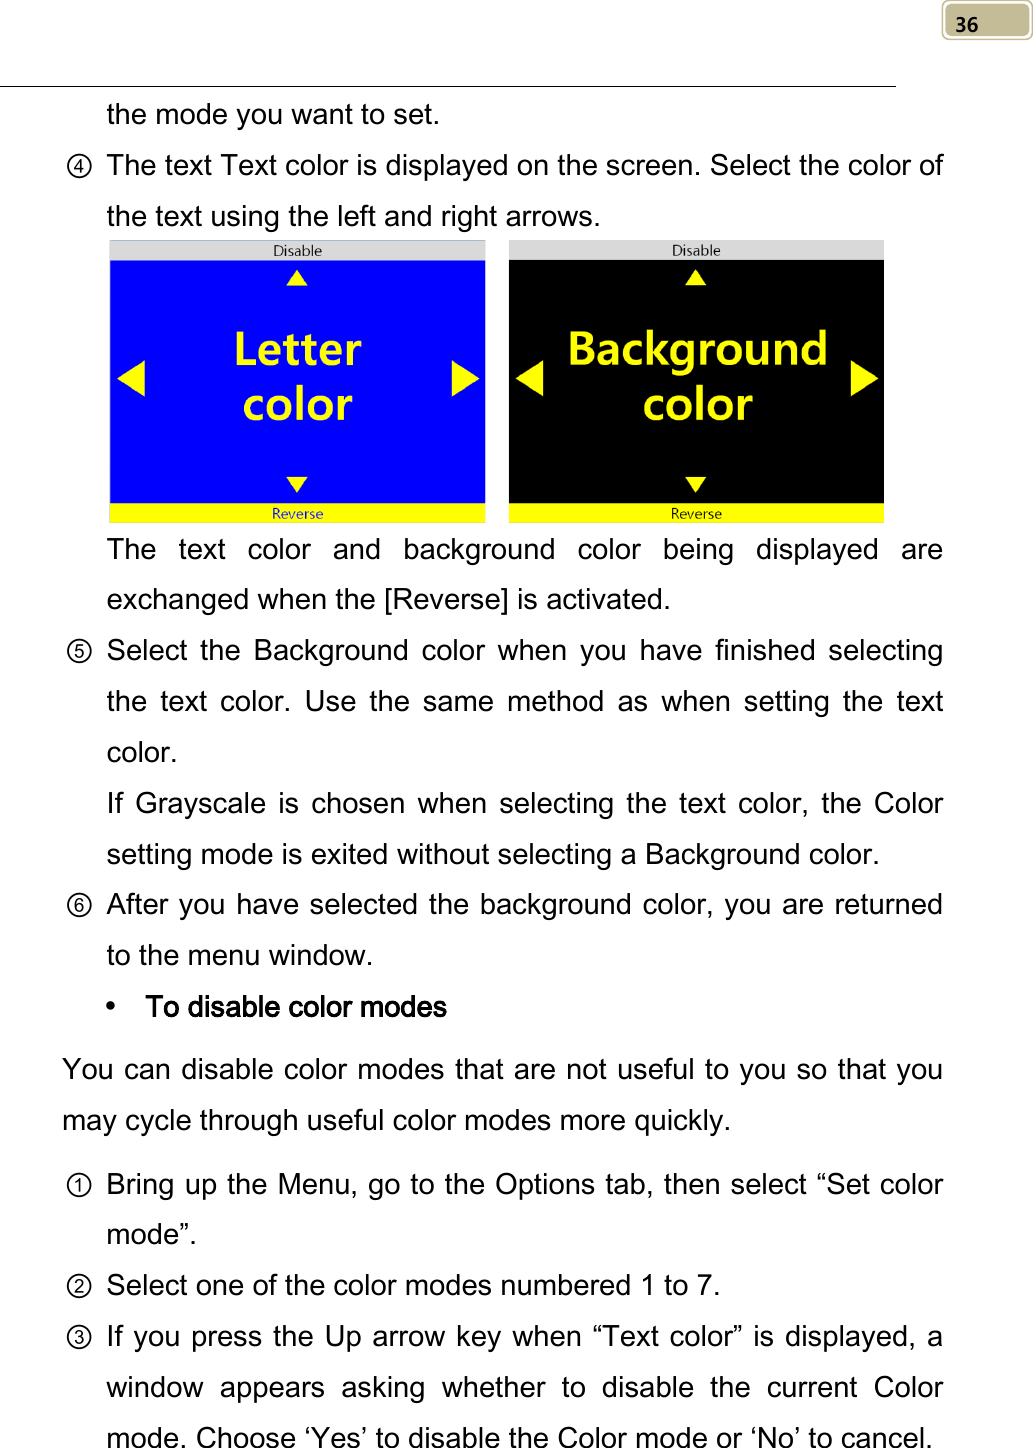   36 the mode you want to set. ④ The text Text color is displayed on the screen. Select the color of the text using the left and right arrows.     The text color and background color being displayed are exchanged when the [Reverse] is activated. ⑤ Select  the  Background color when you have finished selecting the  text  color. Use the same method as when setting the text color.   If Grayscale is chosen  when selecting the  text  color,  the  Color setting mode is exited without selecting a Background color. ⑥ After you have selected the background color, you are returned to the menu window.  To disable color modes You can disable color modes that are not useful to you so that you may cycle through useful color modes more quickly. ① Bring up the Menu, go to the Options tab, then select “Set color mode”. ② Select one of the color modes numbered 1 to 7. ③ If you press the Up arrow key when “Text color” is displayed, a window  appears  asking whether to disable the current Color mode. Choose ‘Yes’ to disable the Color mode or ‘No’ to cancel. 